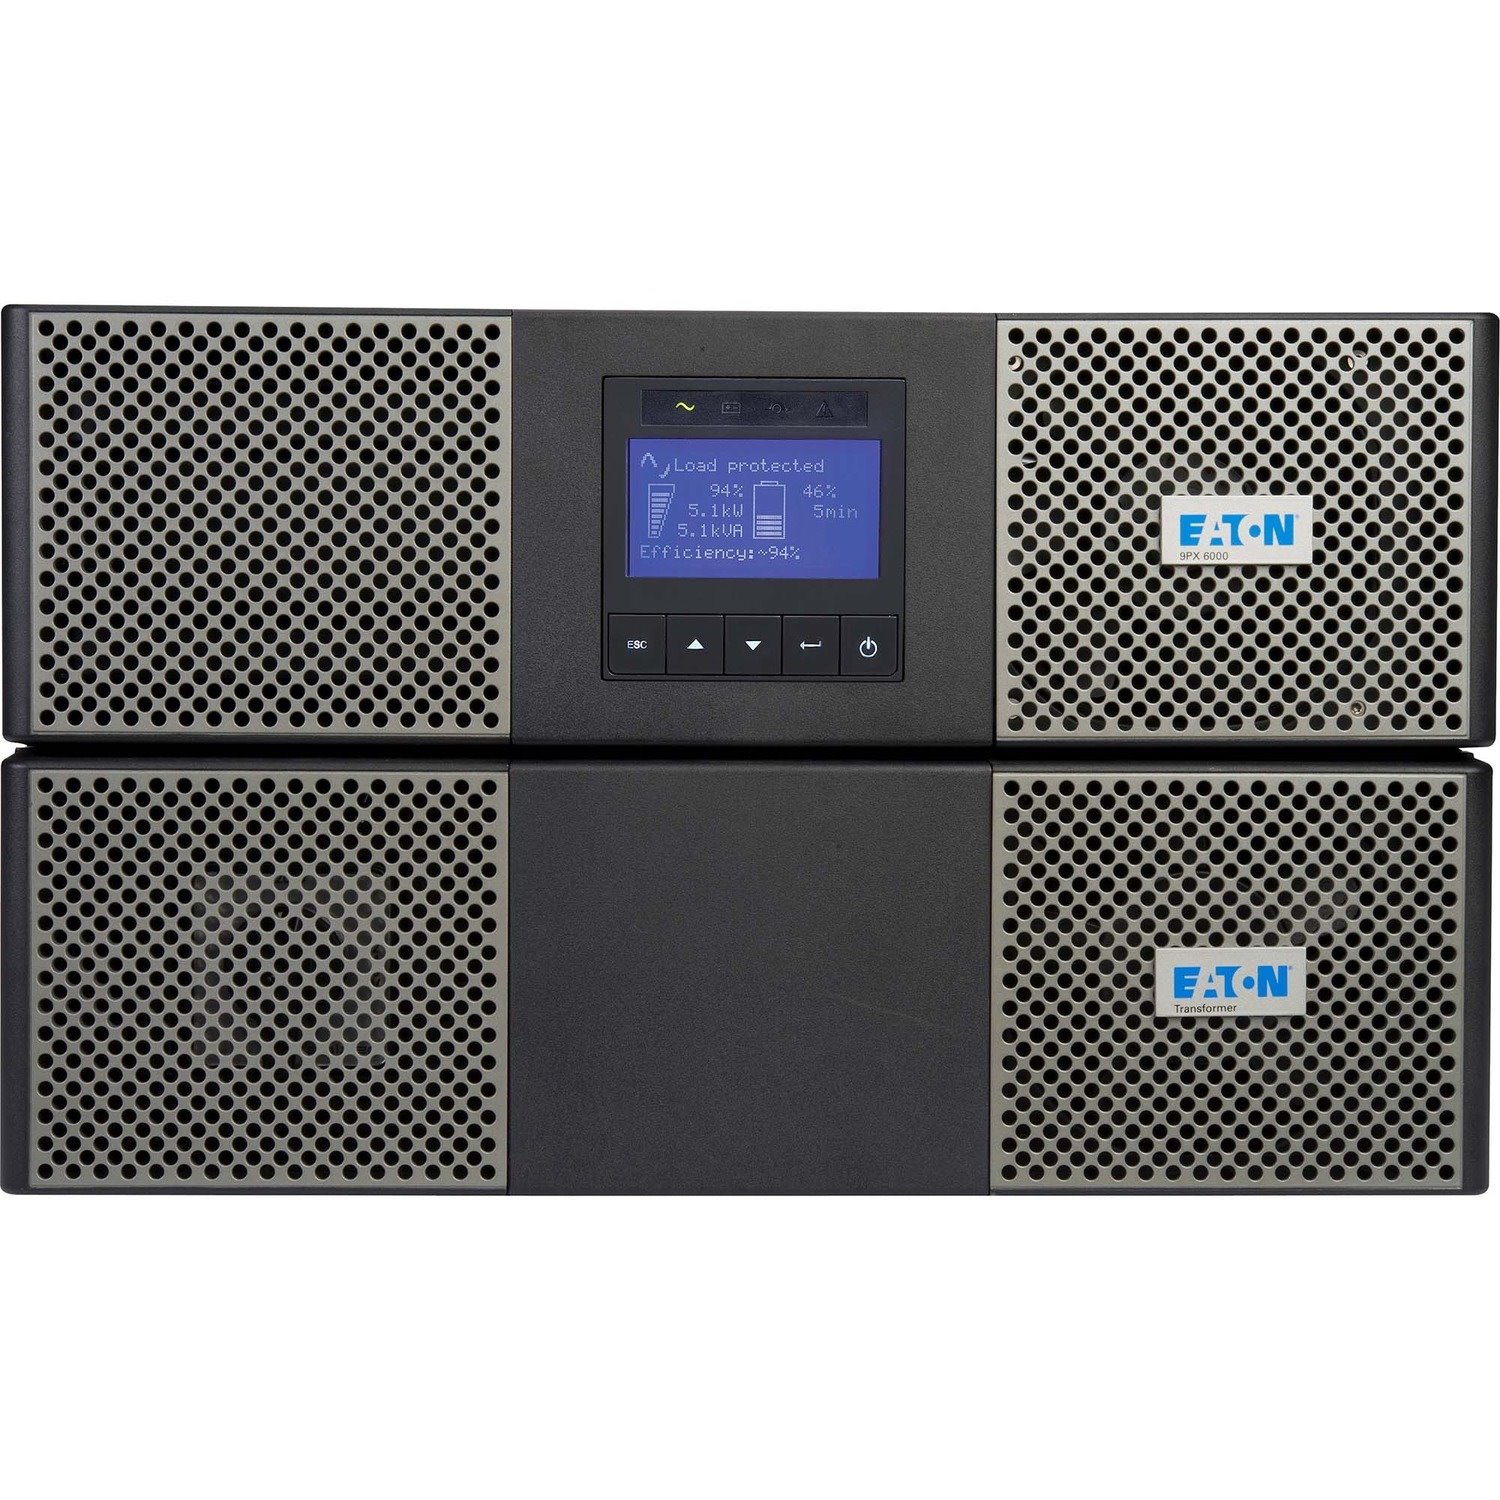 Eaton 9PX 3000VA 3000W 208V Online Double-Conversion UPS - L6-30P, 18x 5-20R, 2 L6-20R, 1 L6-30R Outlets, Cybersecure Network Card, Extended Run, 6U Rack/Tower